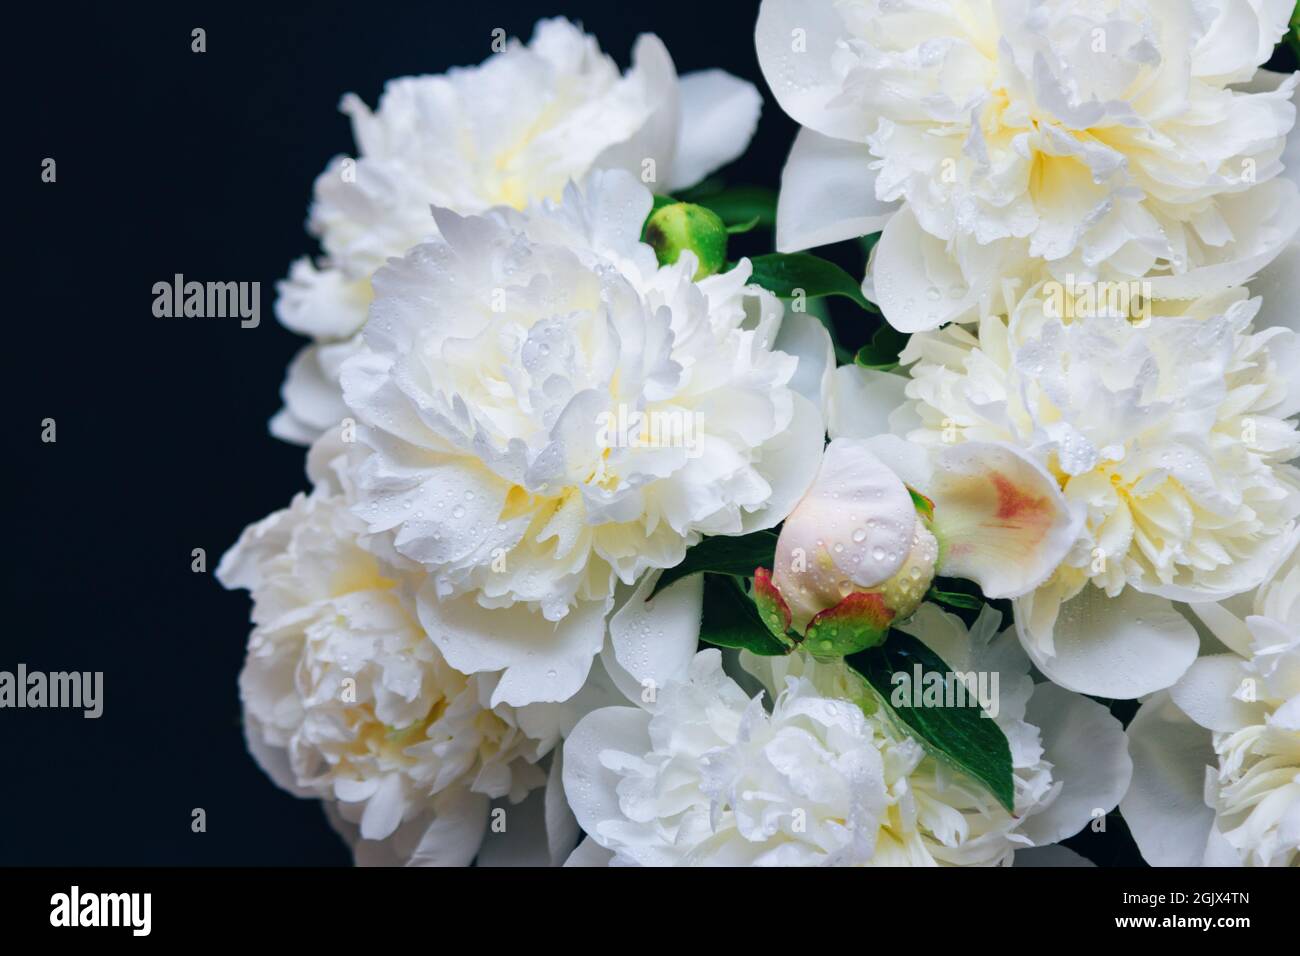 Beautiful white peony flowers bouquet with water drops on petals in glass vase with dark background Stock Photo